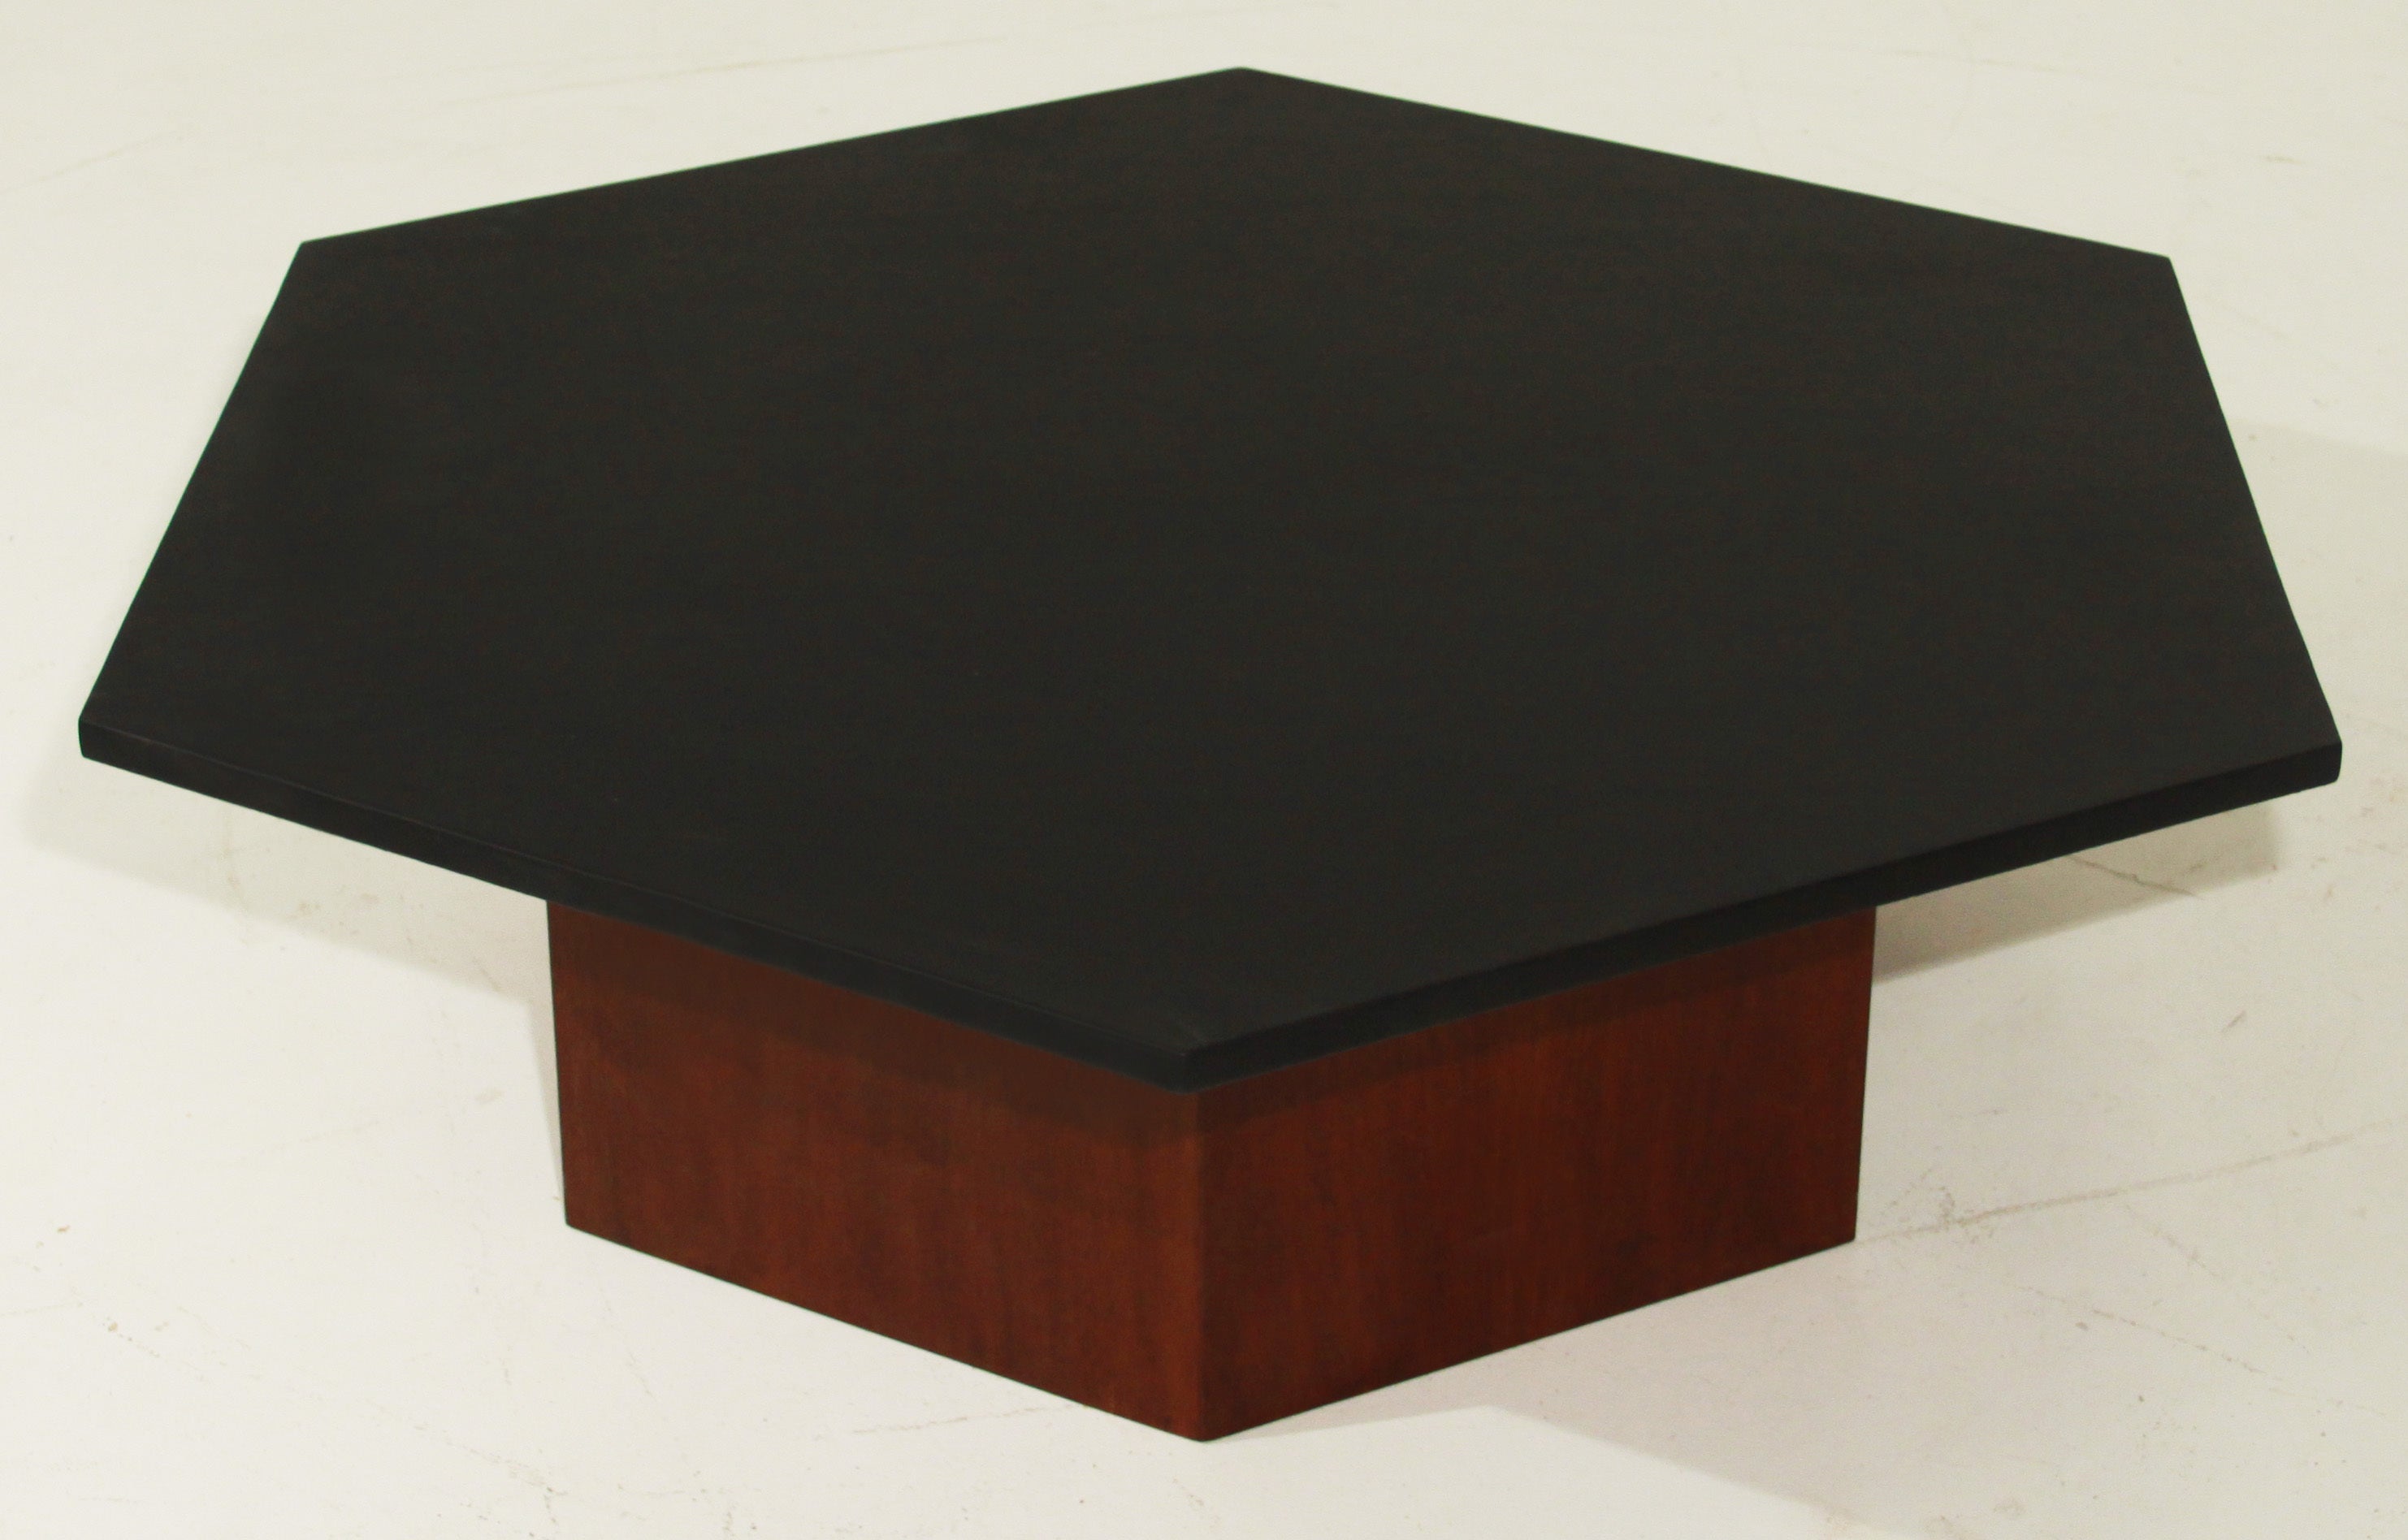 Solid Walnut hexagon coffee table with leather hexagon top